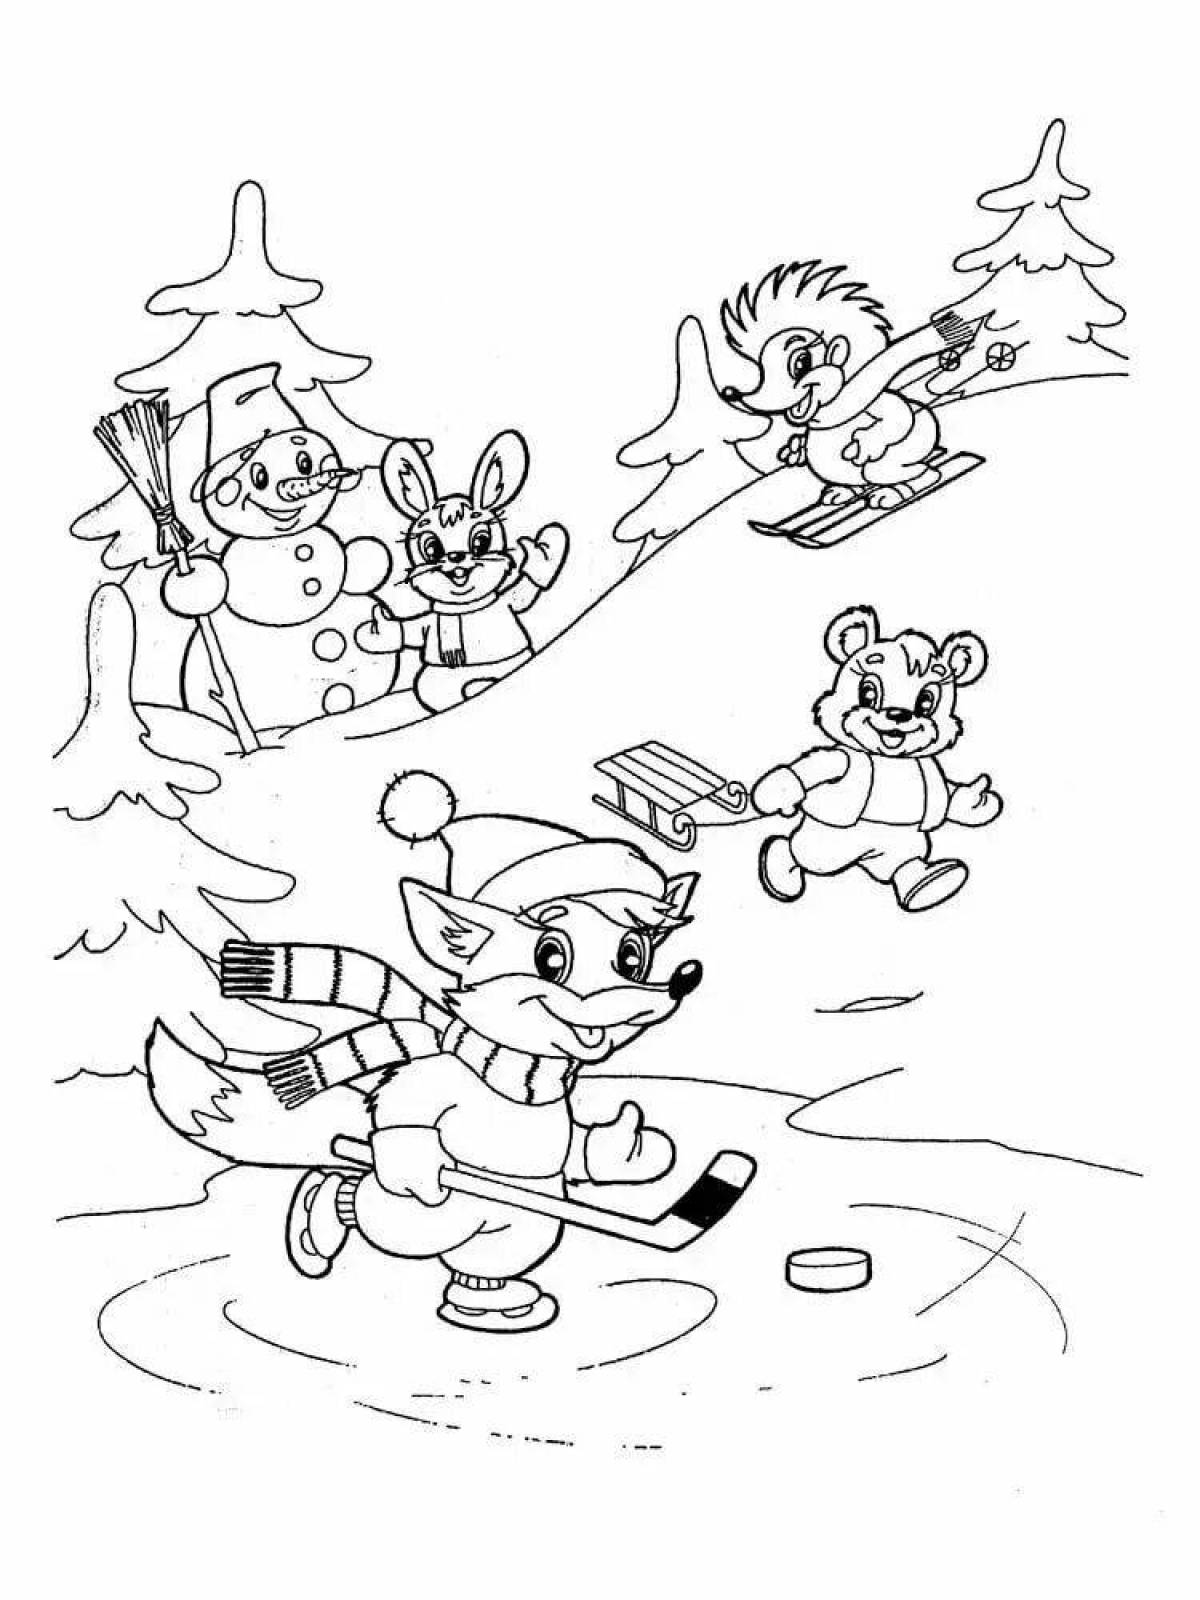 Adorable animal coloring book for kids in winter